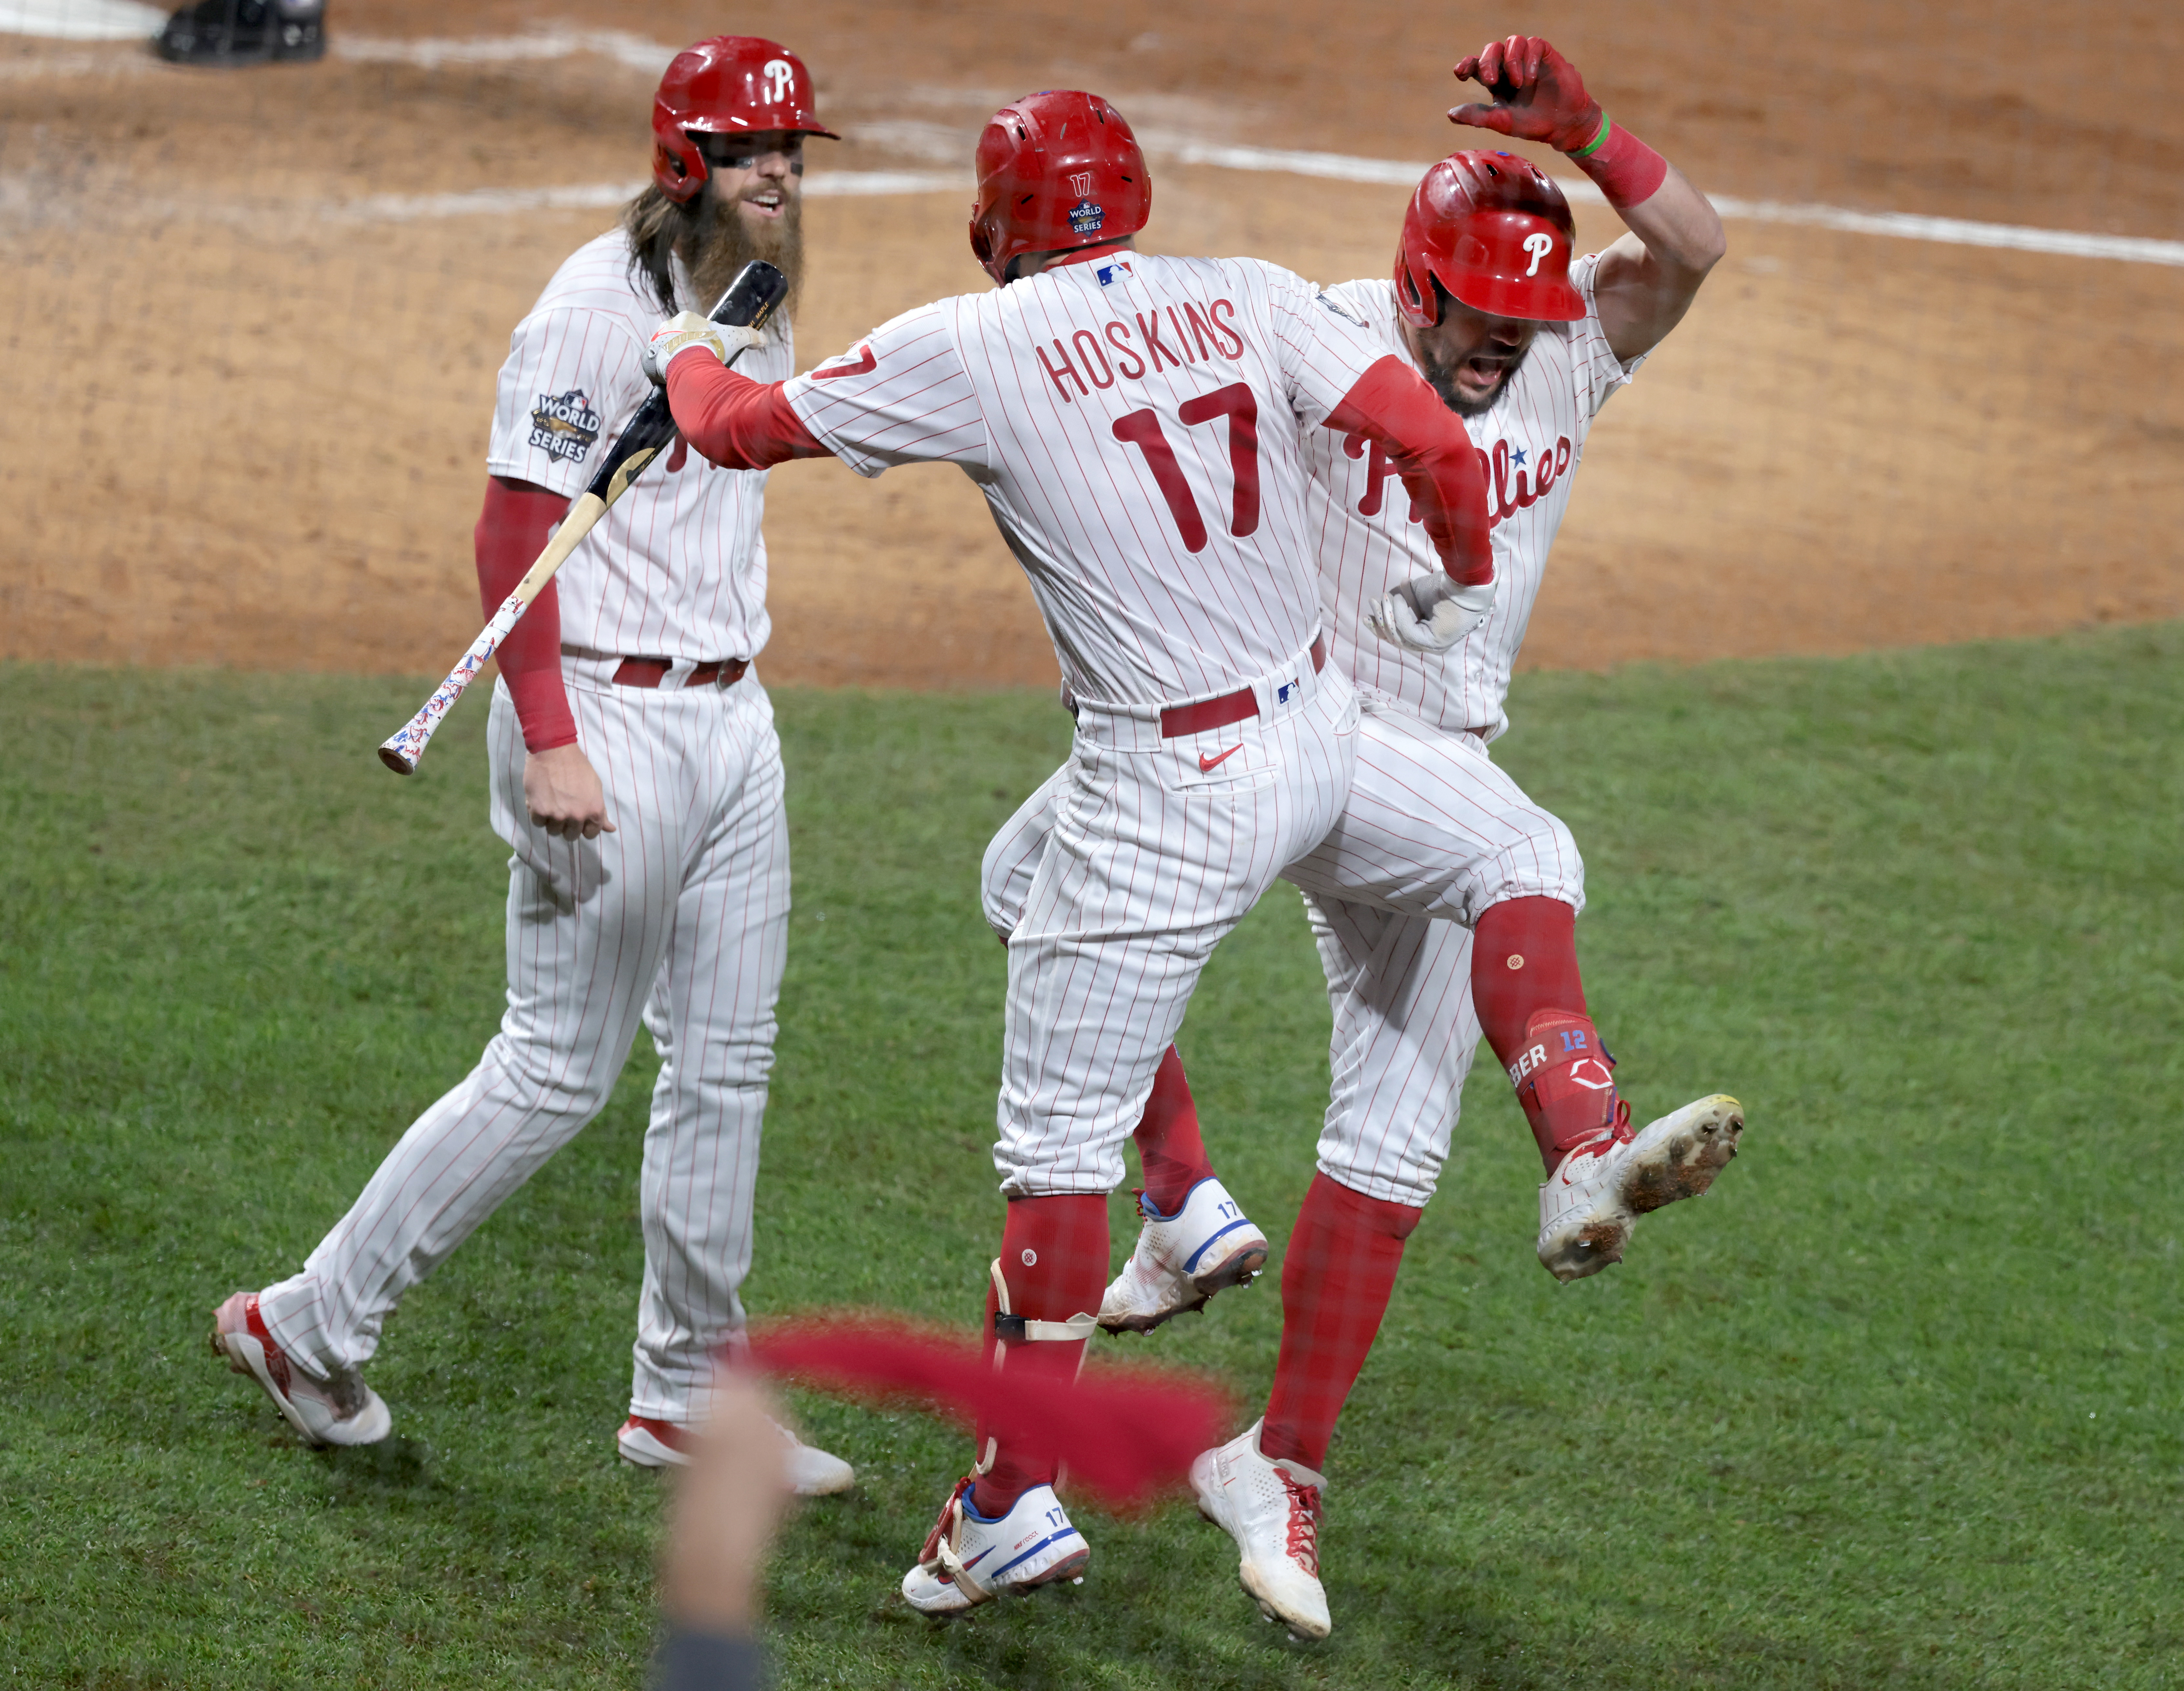 Kyle Schwarber (12) of the Philadelphia Phillies celebrates his two-run home run with Rhys Hoskins (17) vs.the Houston Astros in the fifth inning during Game 3 of the World Series at Citizens Bank Park, Tuesday, Nov. 1, 2022.